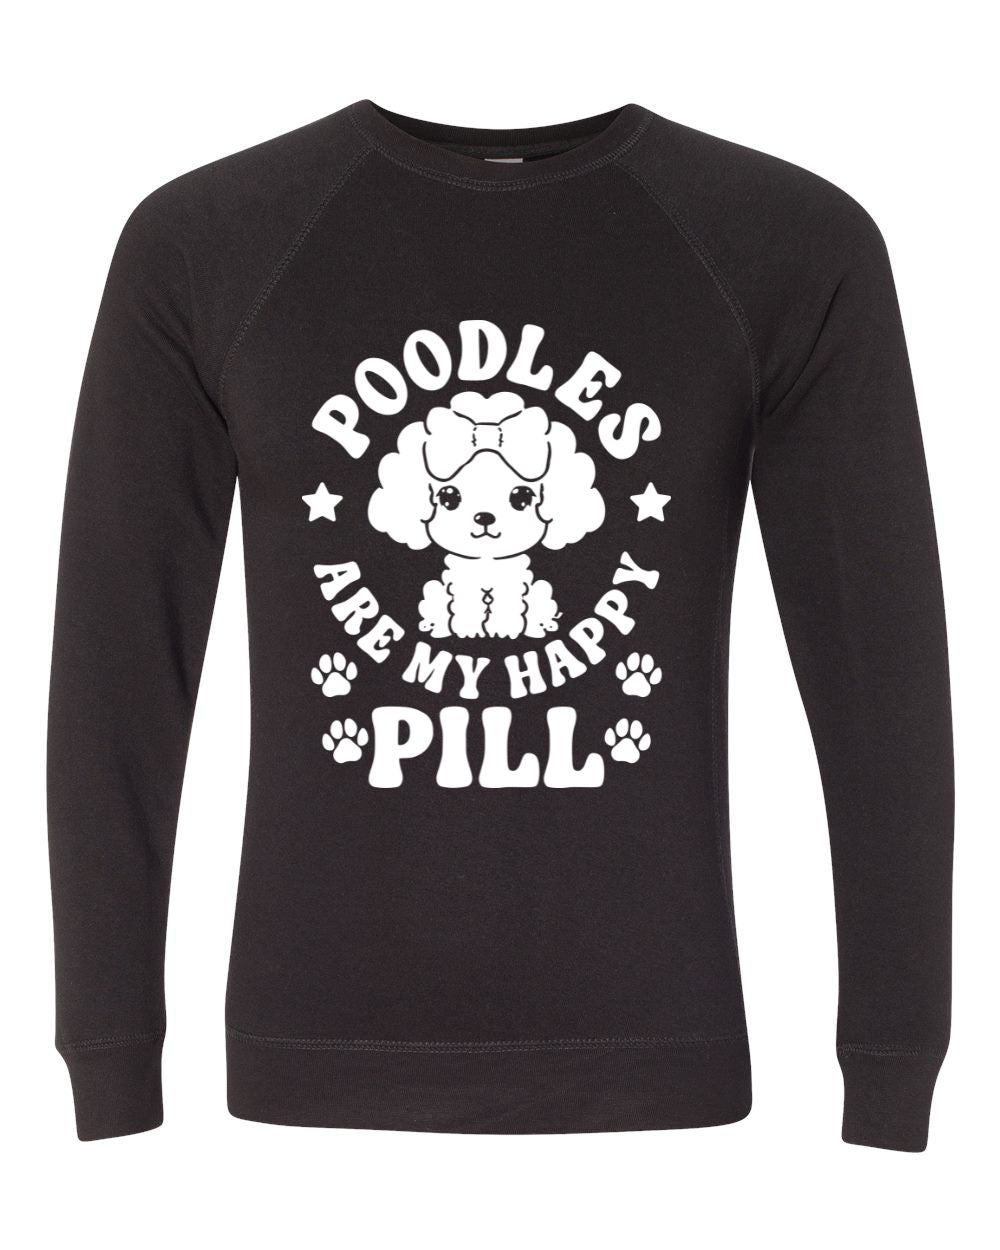 Poodles Are My Happy Pill Sweatshirt